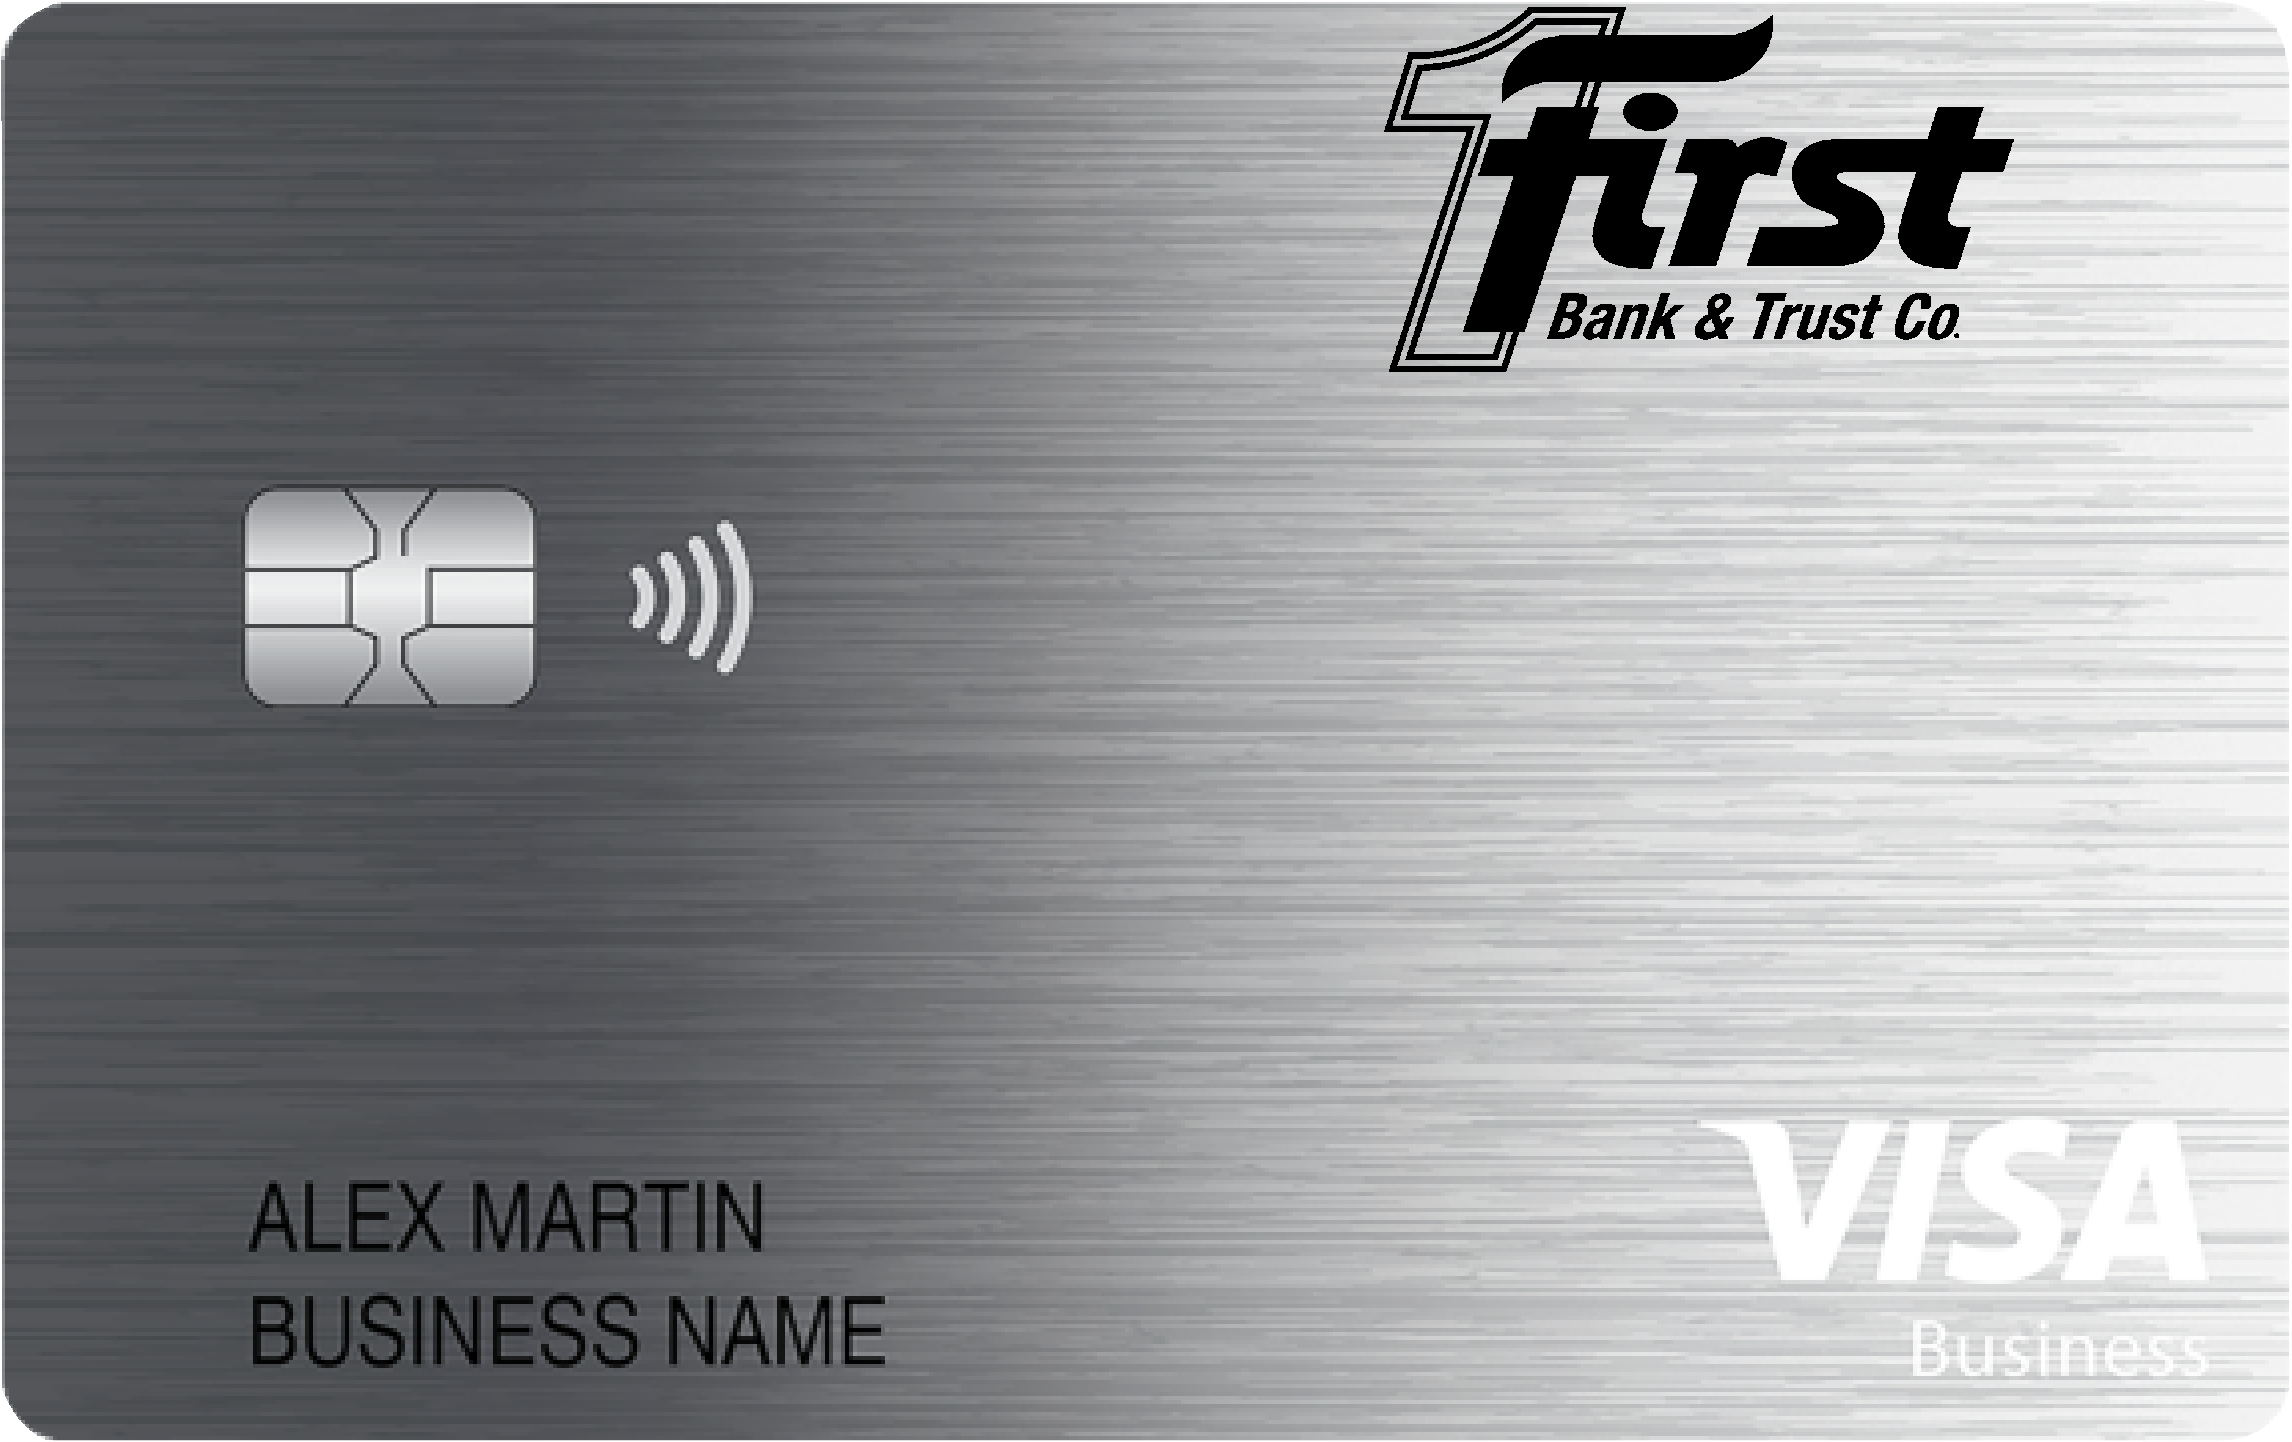 First Bank & Trust Co Business Card Card